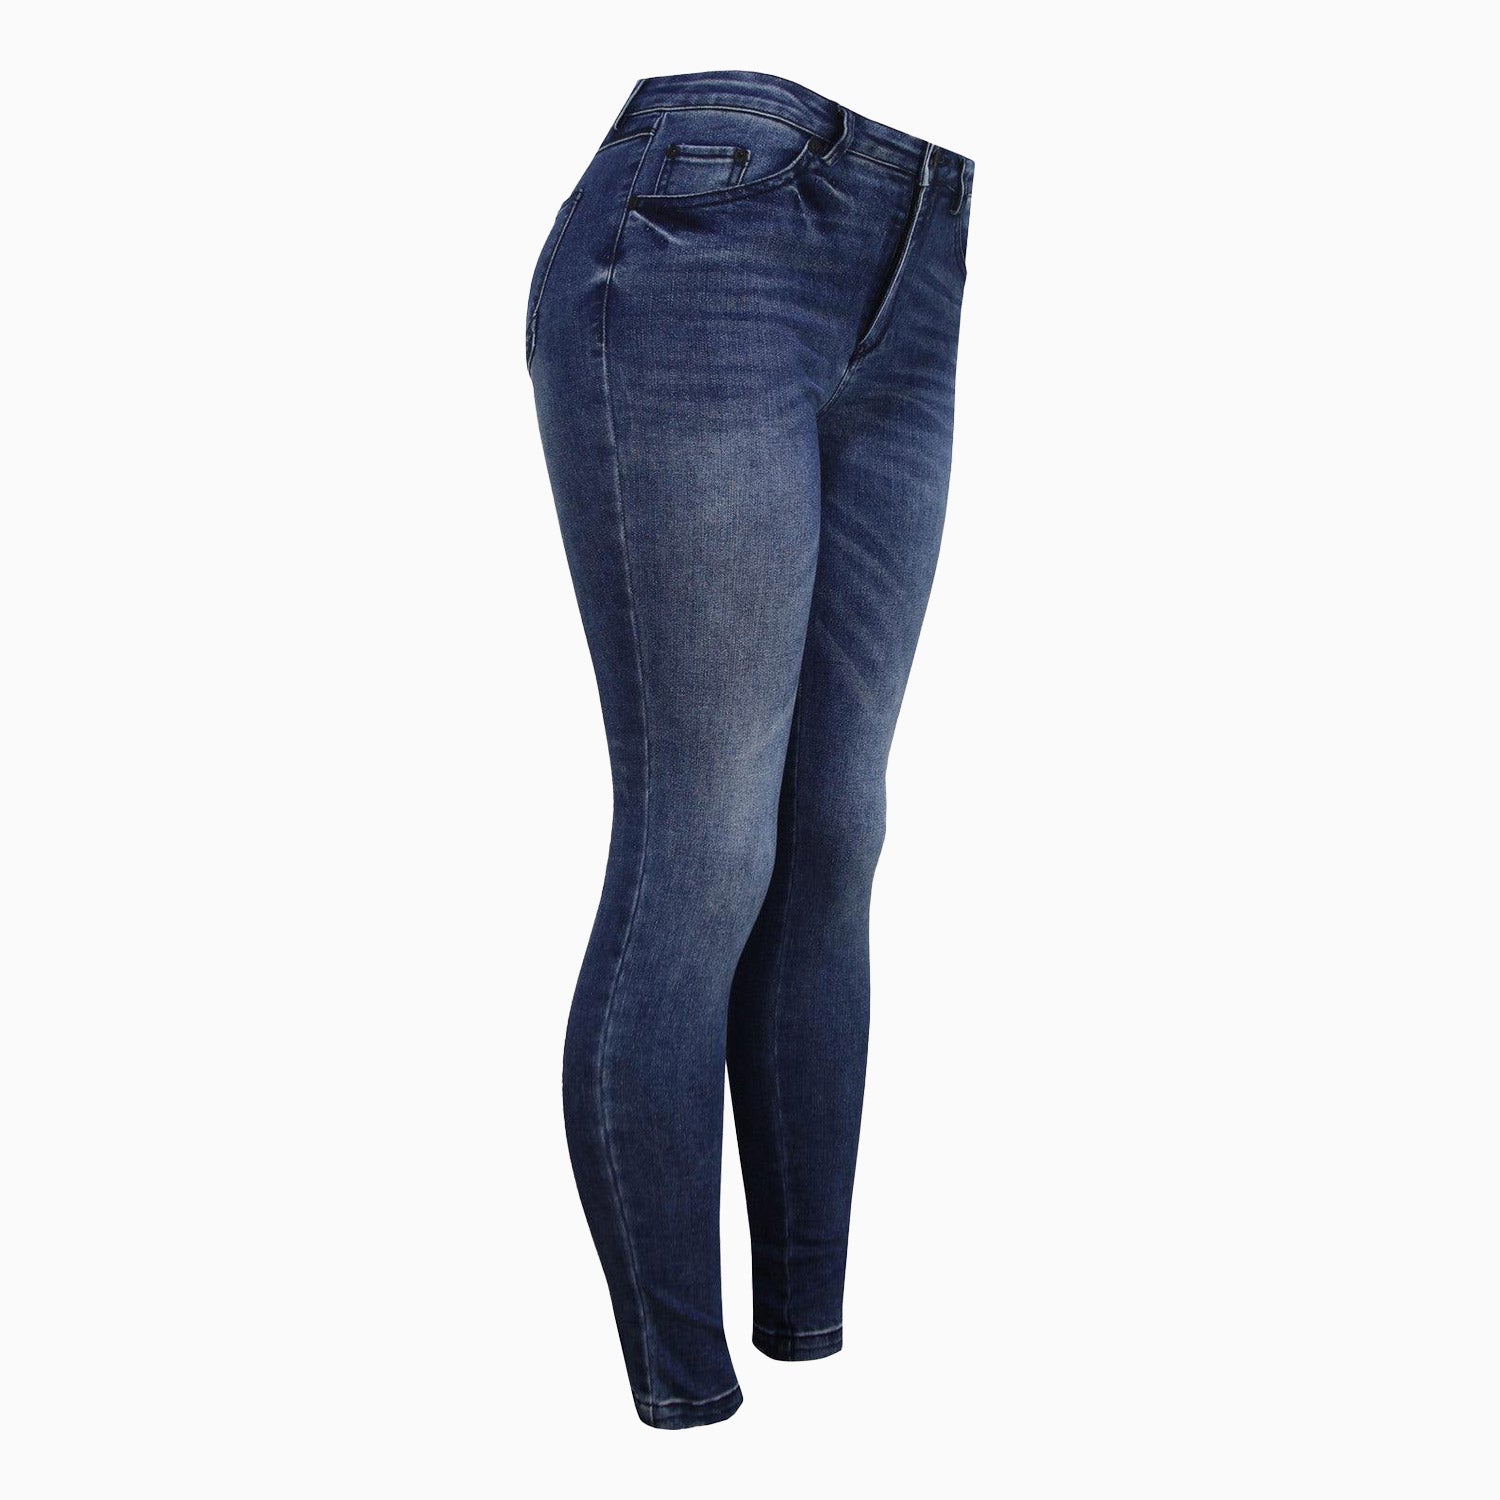 privilege-society-womens-angela-skinny-jeans-pant-ps2020s-105